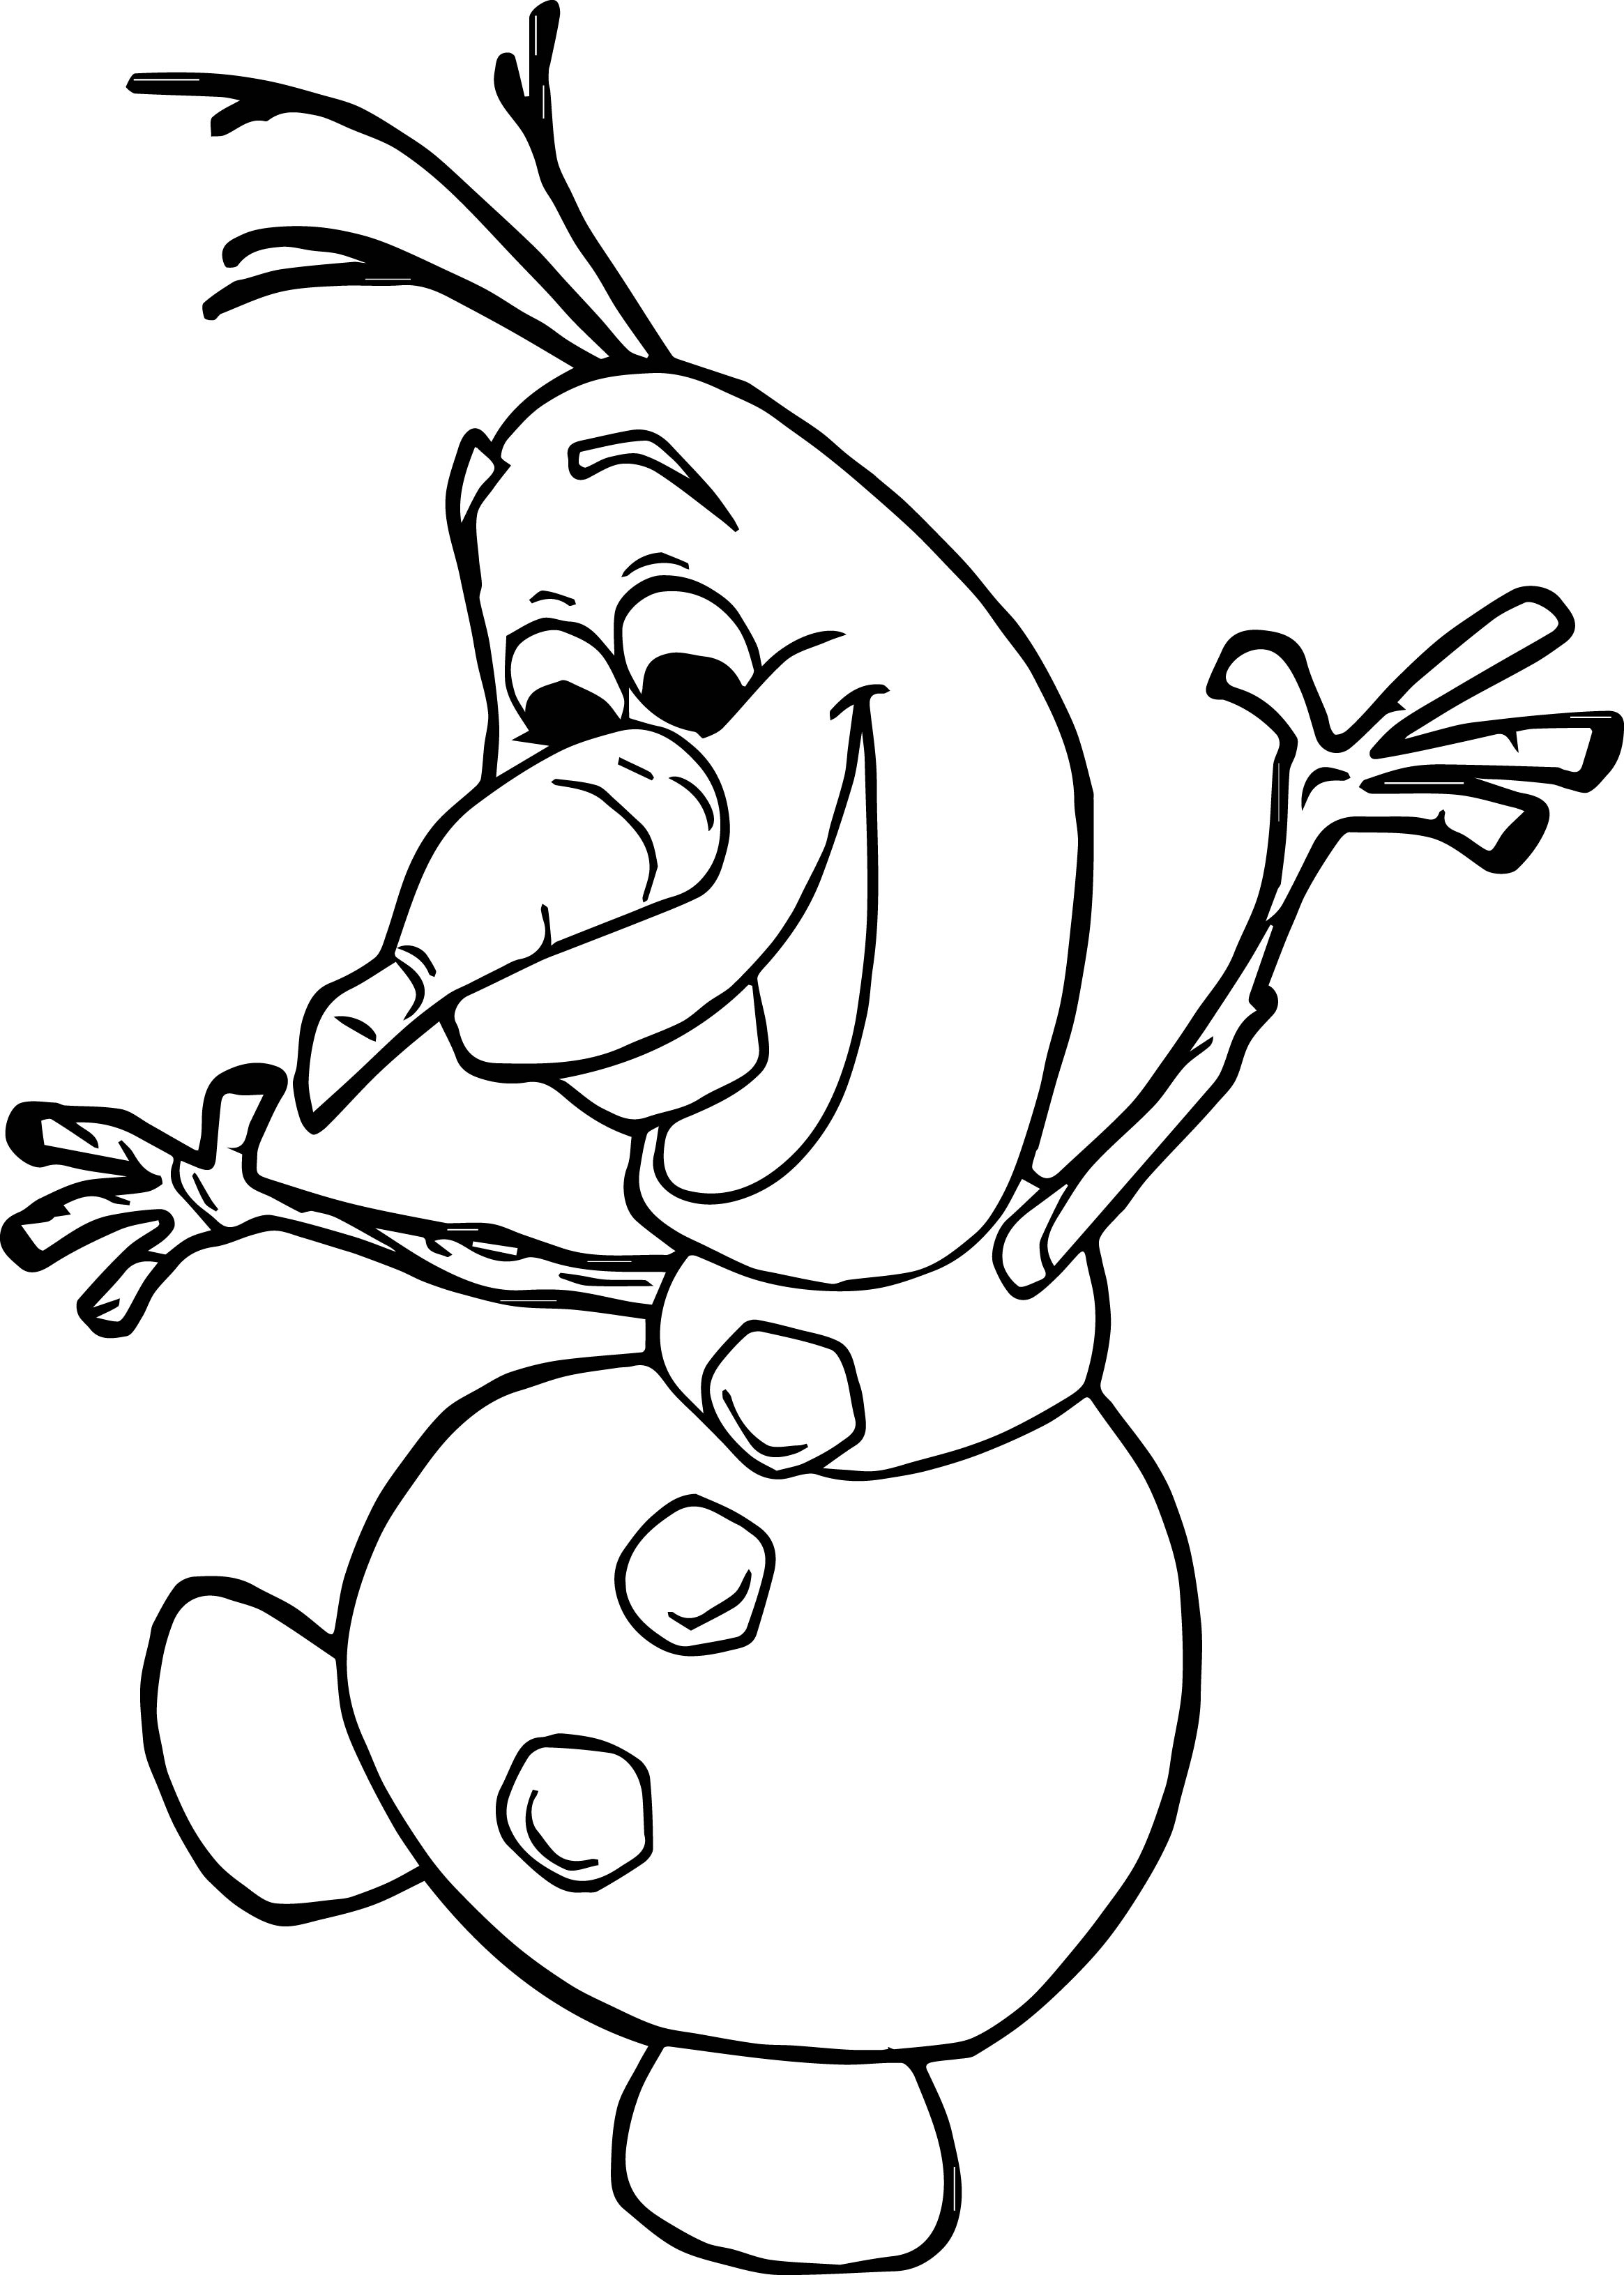 coloring-pages-for-kids-frozen-2-frozen-2-elsa-and-anna-coloring